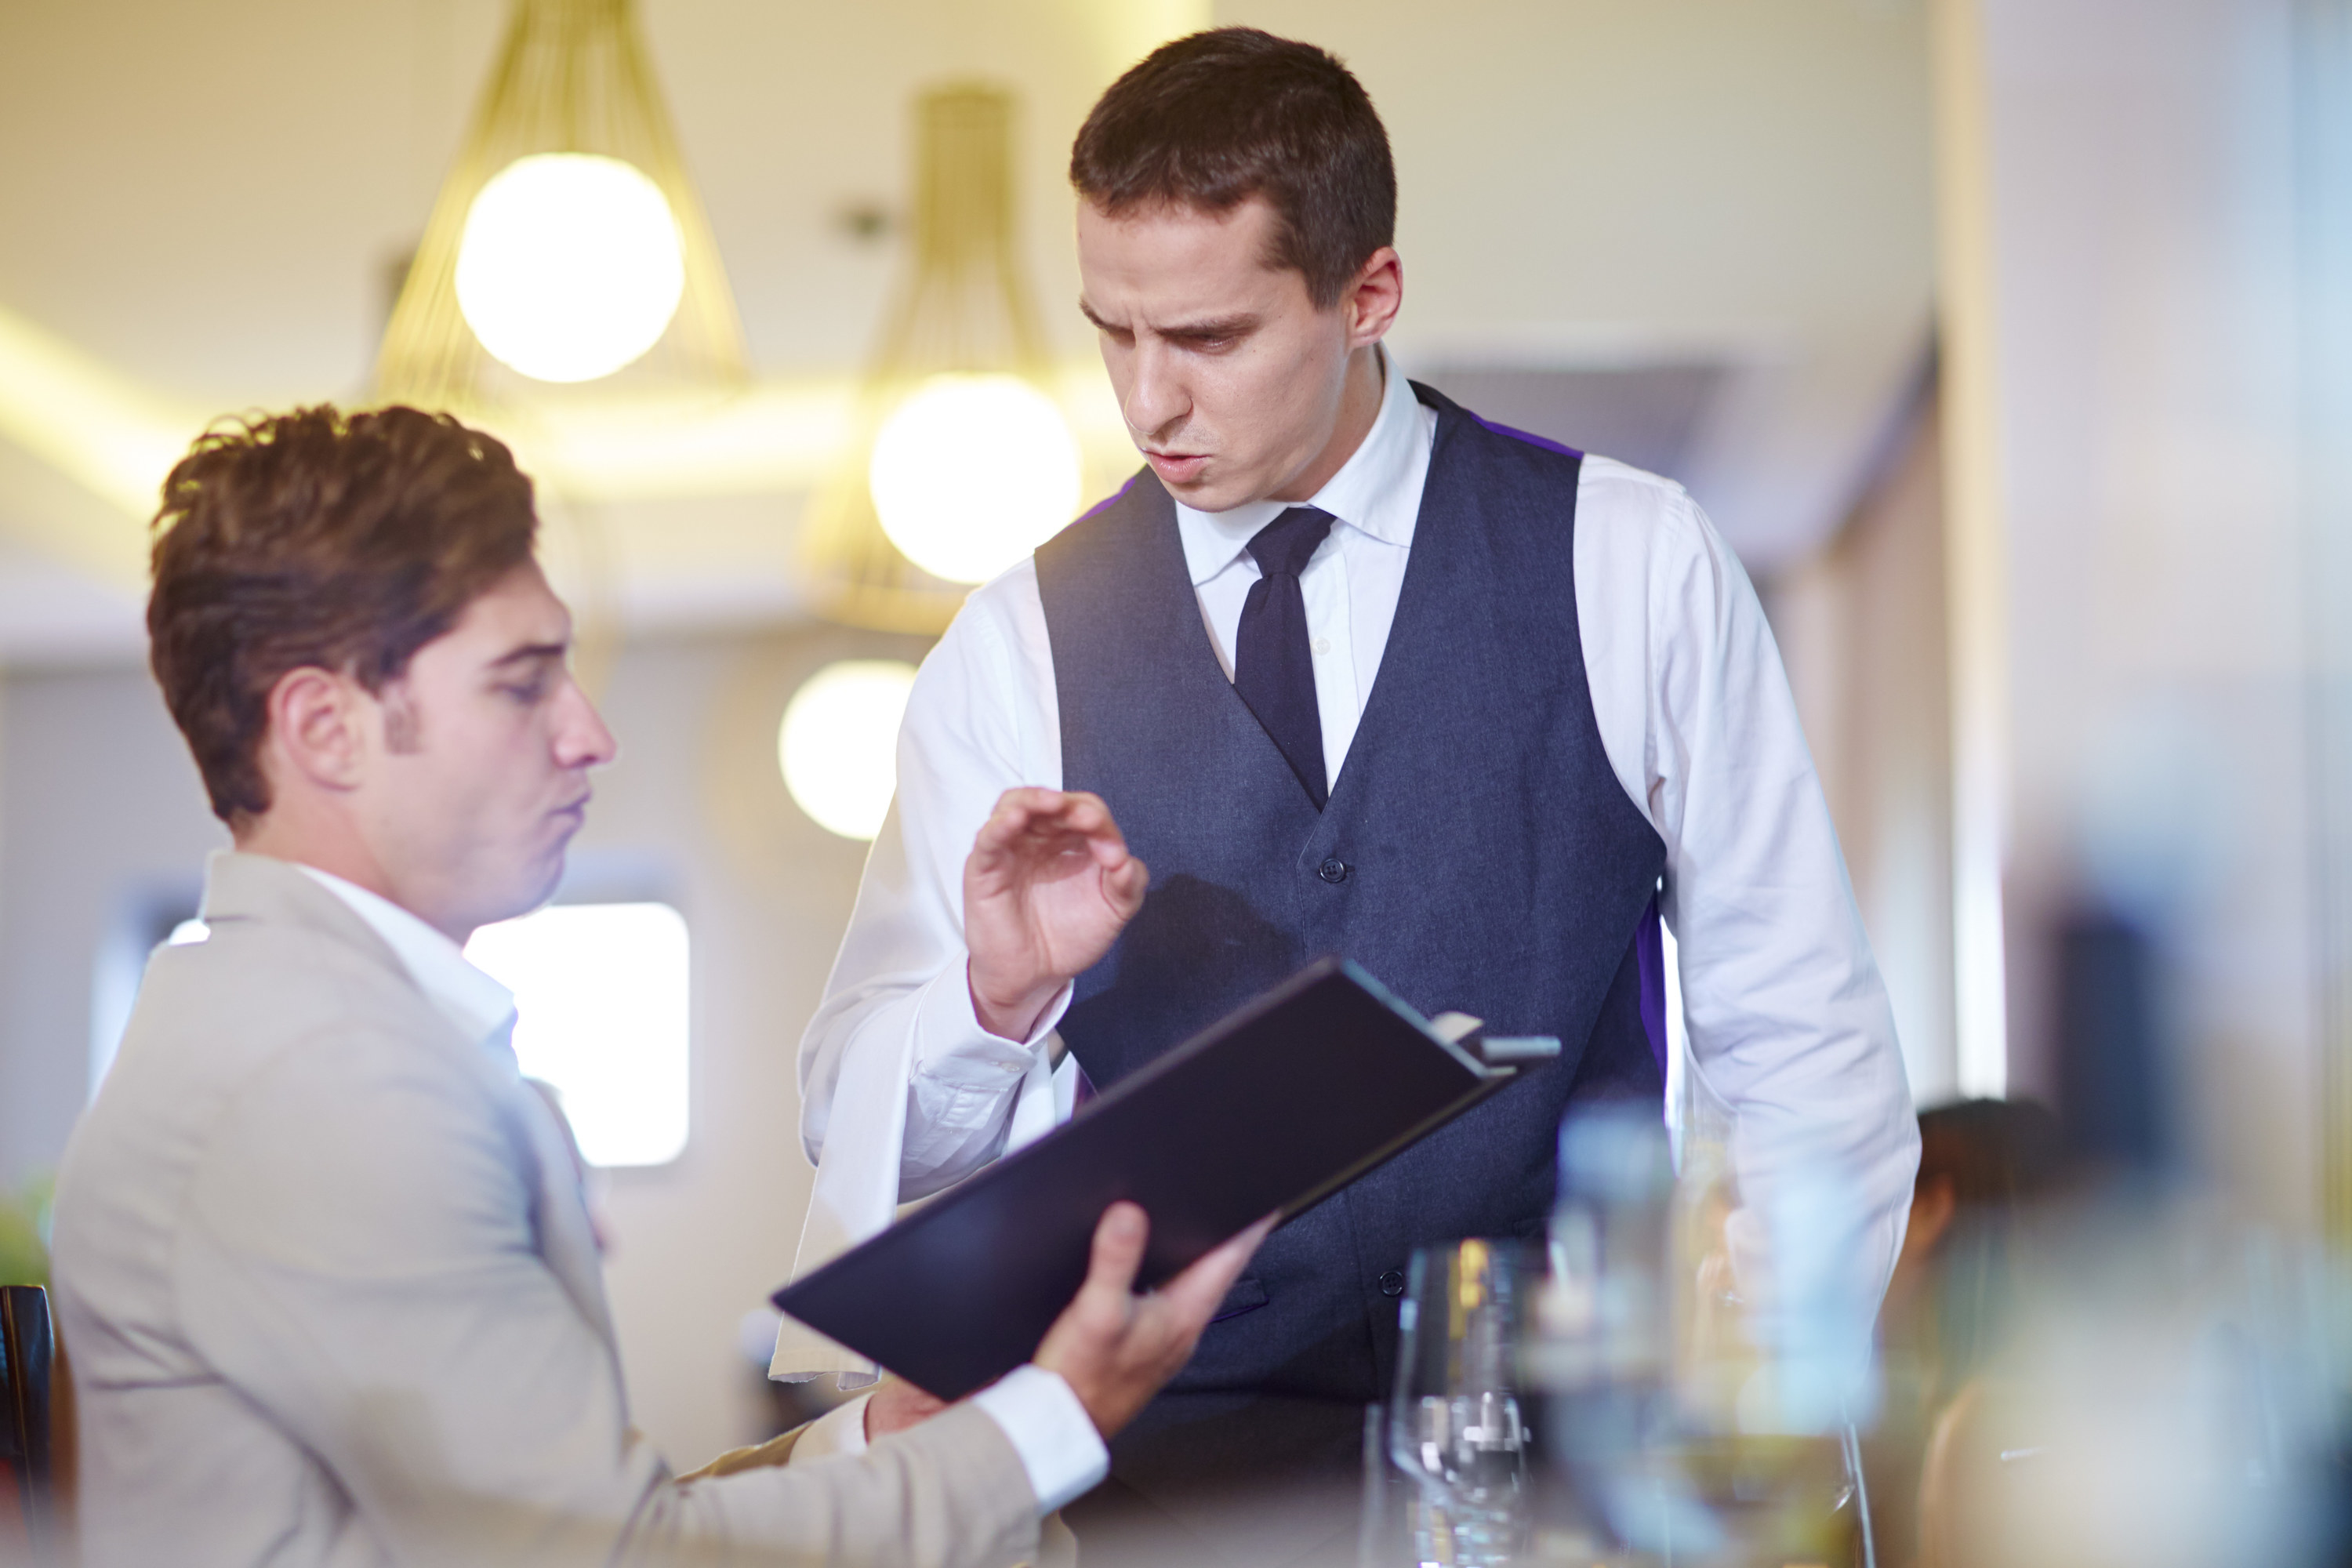 a person ordering food with a waiter